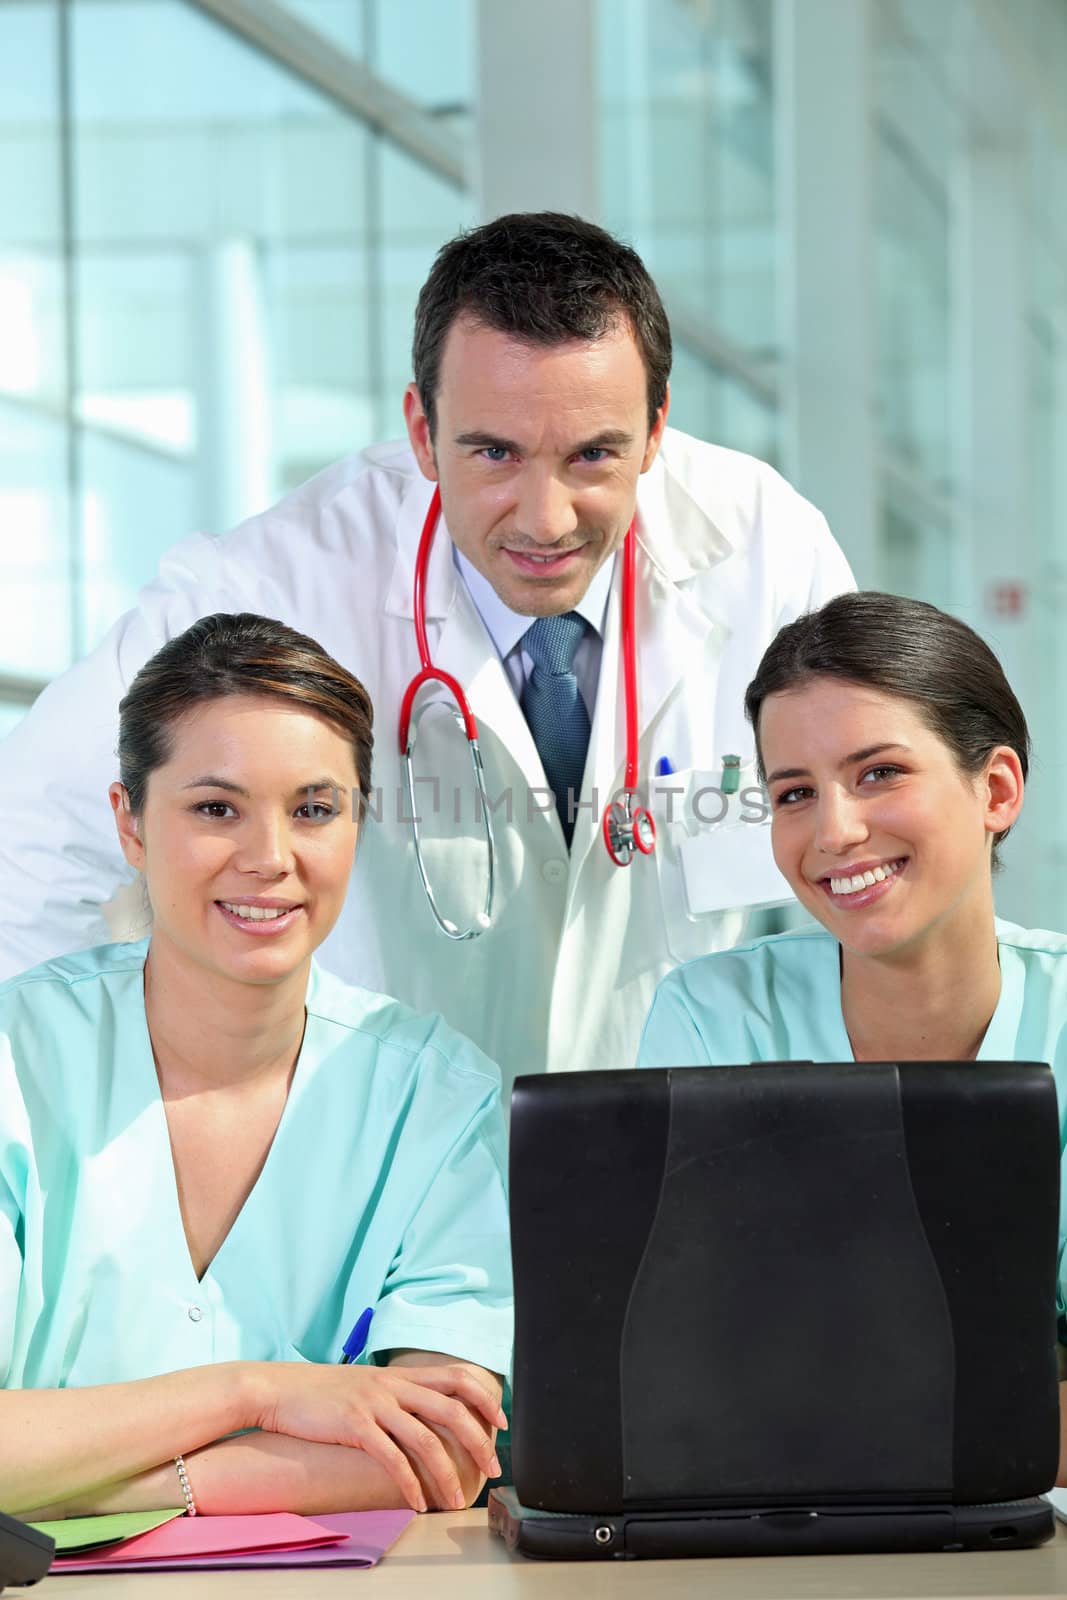 A group of medical professionals by phovoir